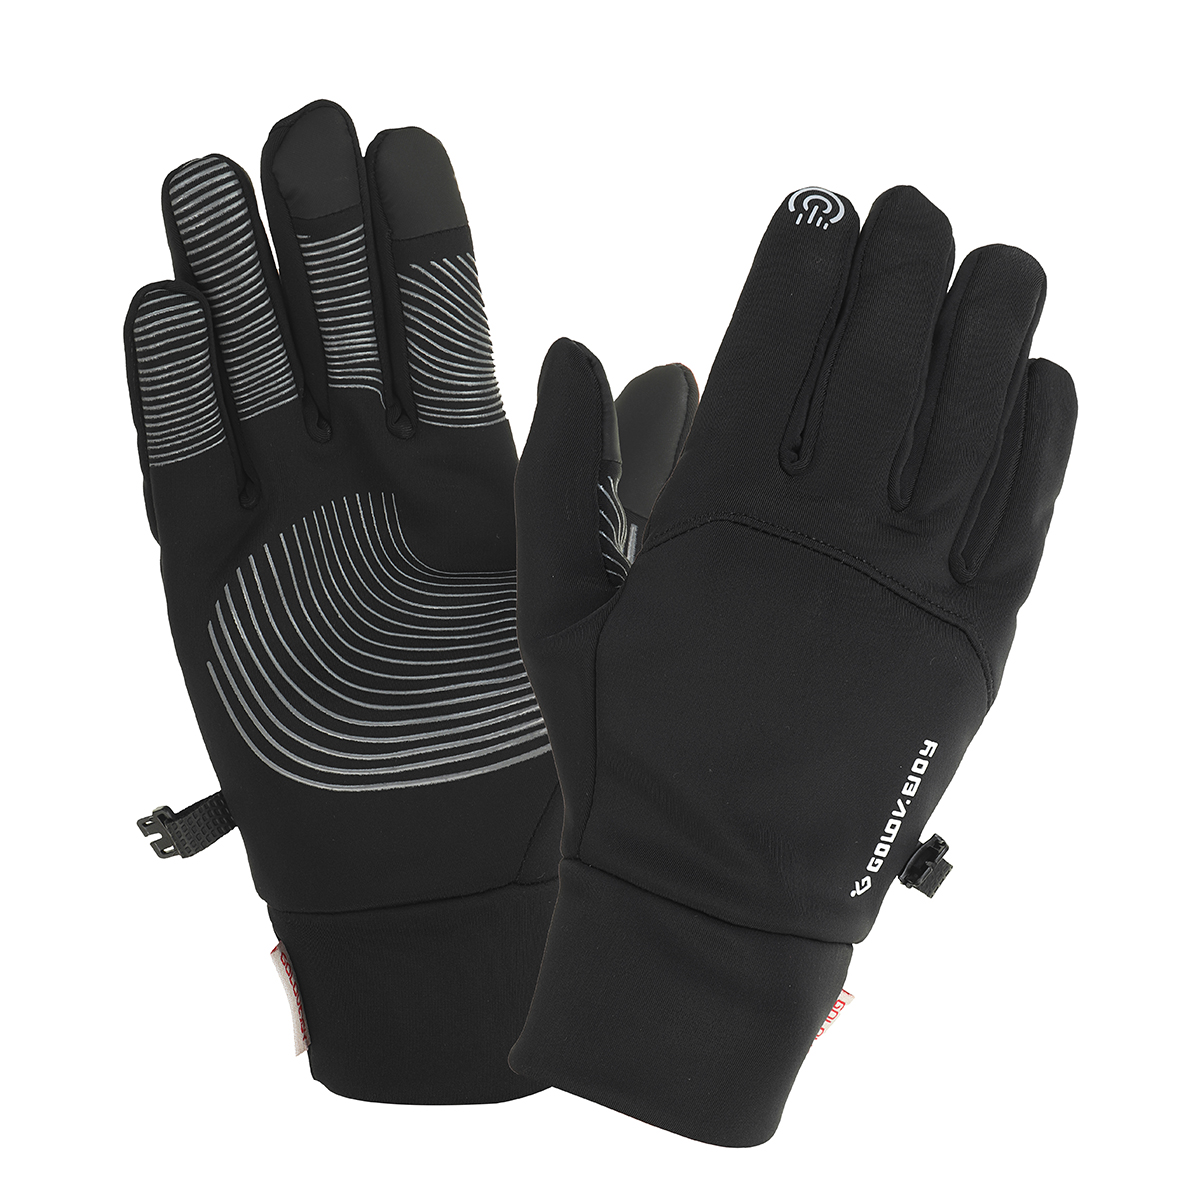 Winter-Warm-Touch-Screen-Thermal-Gloves-Ski-Snow-Snowboard-Cycling-Waterproof-Winter-Gloves-1921750-3